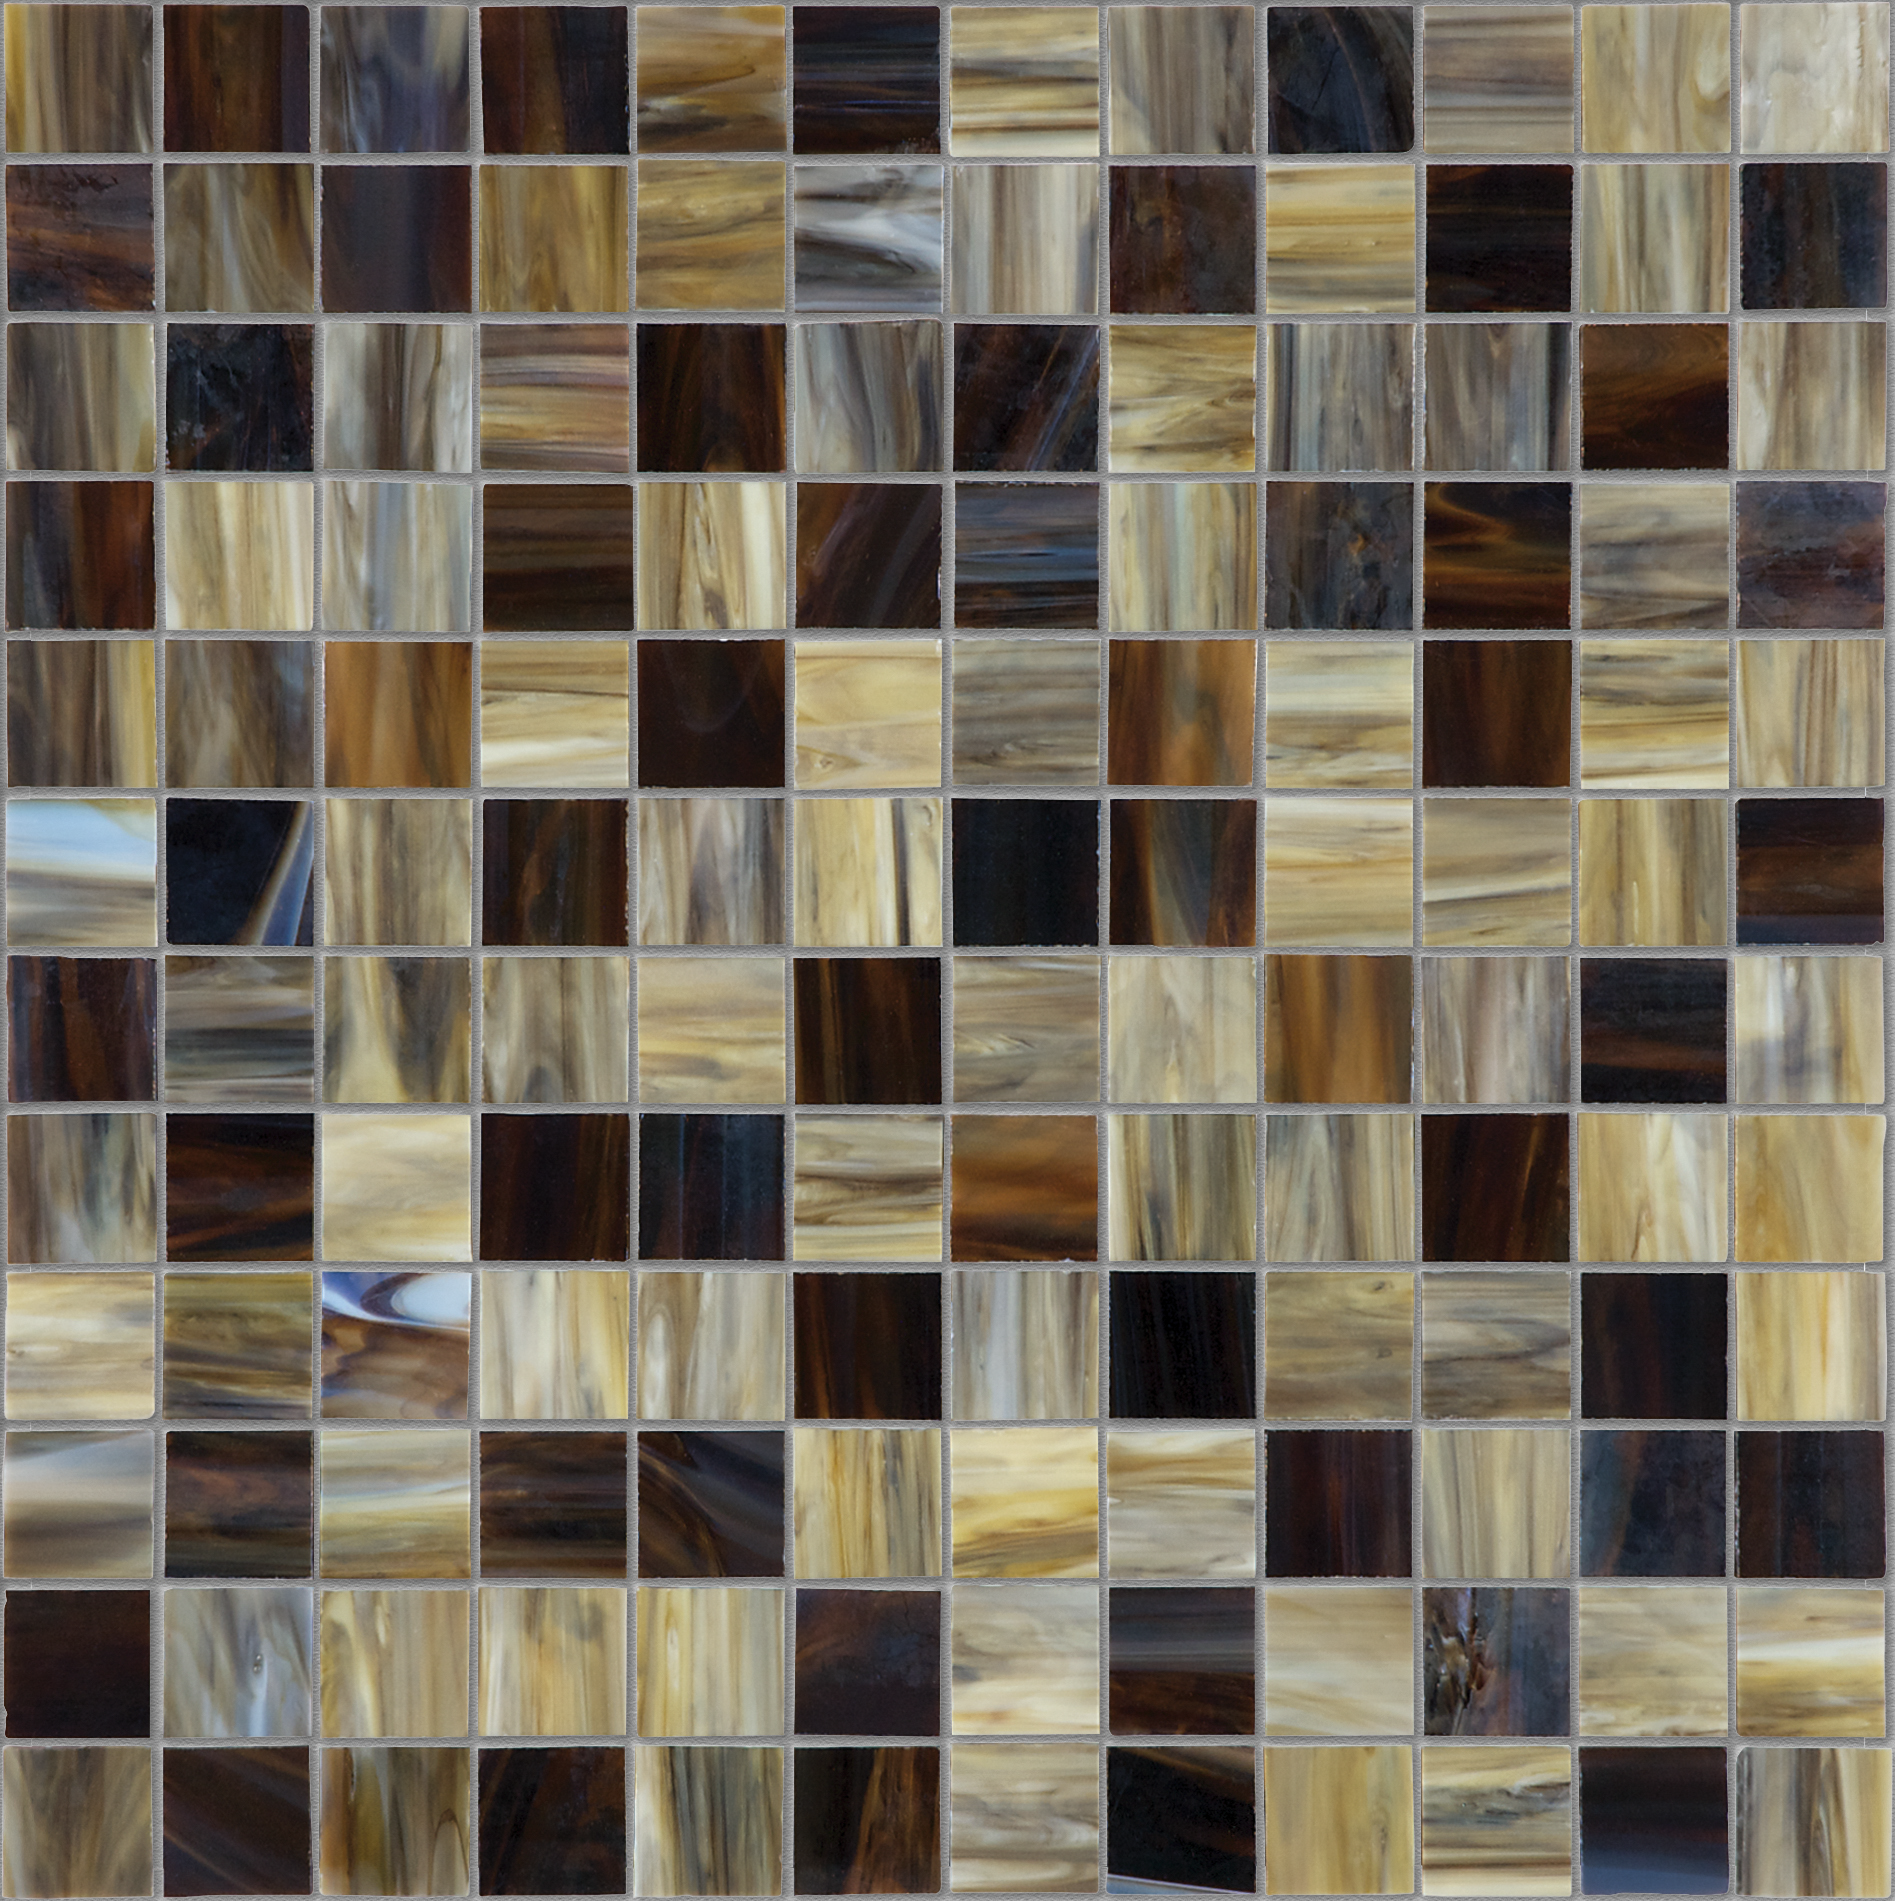 paradiso straight stack 1x1-inch pattern fused glass mosaic from baroque anatolia collection distributed by surface group international glossy finish rounded edge mesh shape